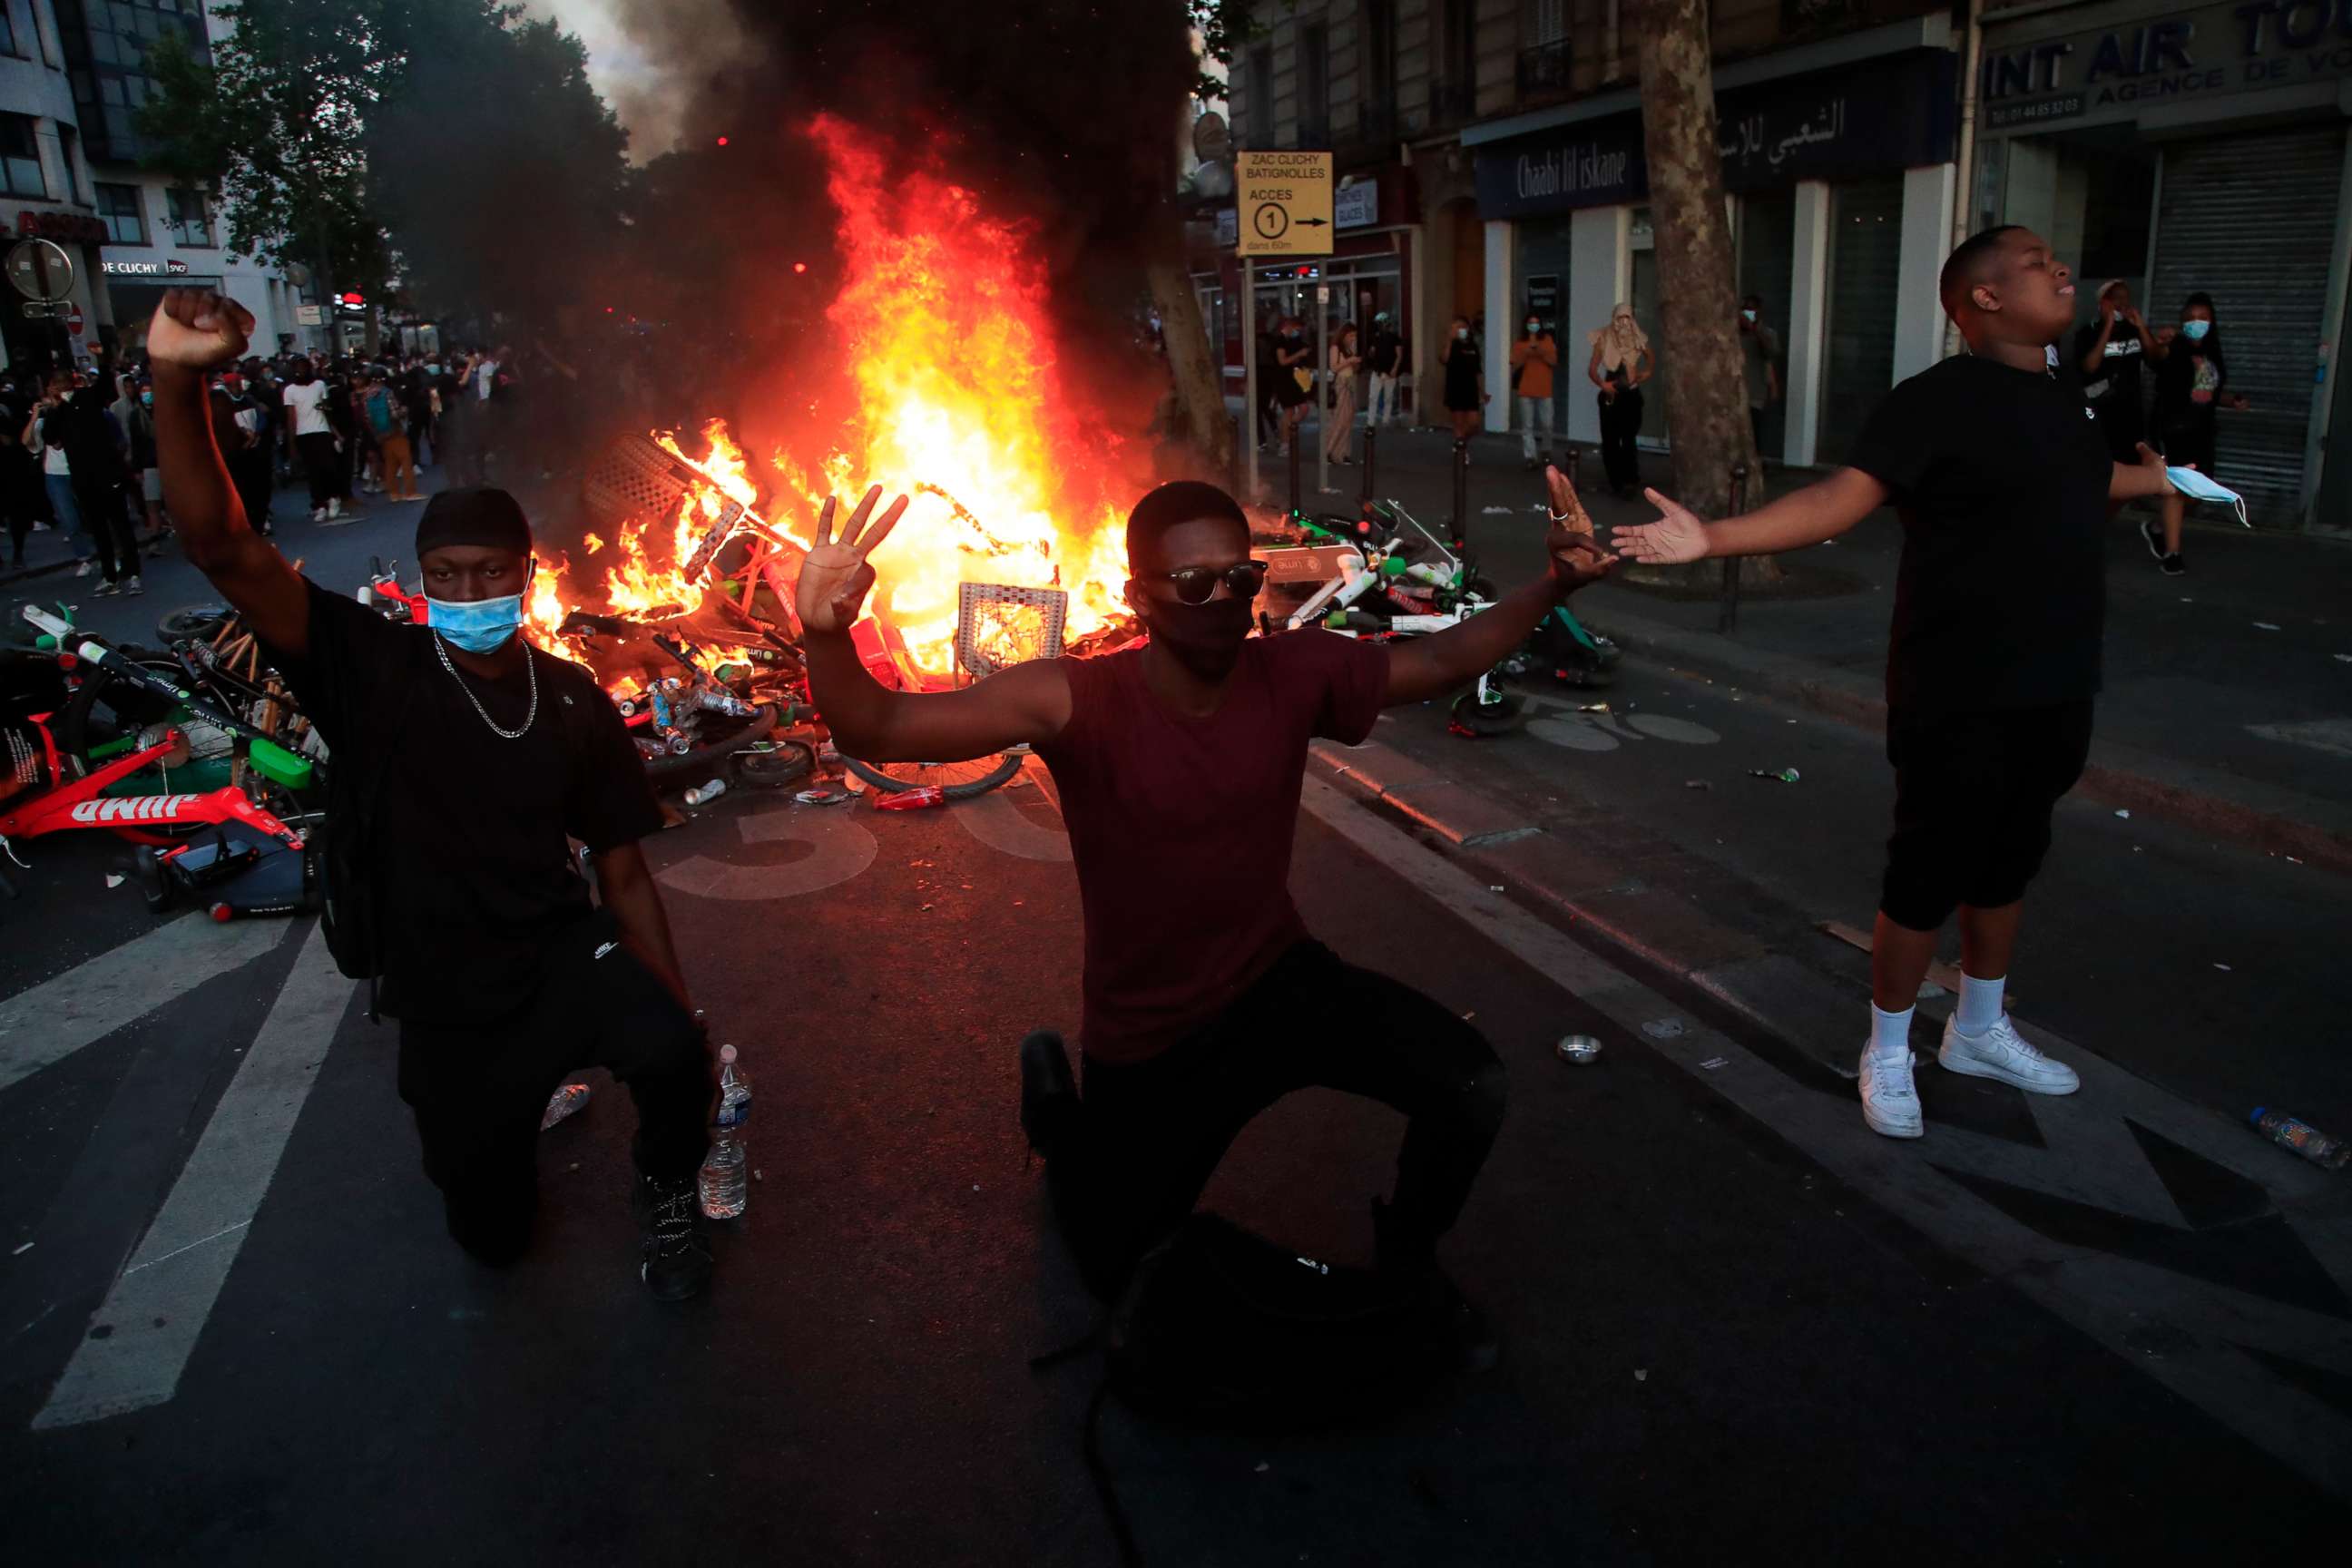 PHOTO: Protesters kneel and react by a burning barricade during a demonstration Tuesday, June 2, 2020 in Paris.